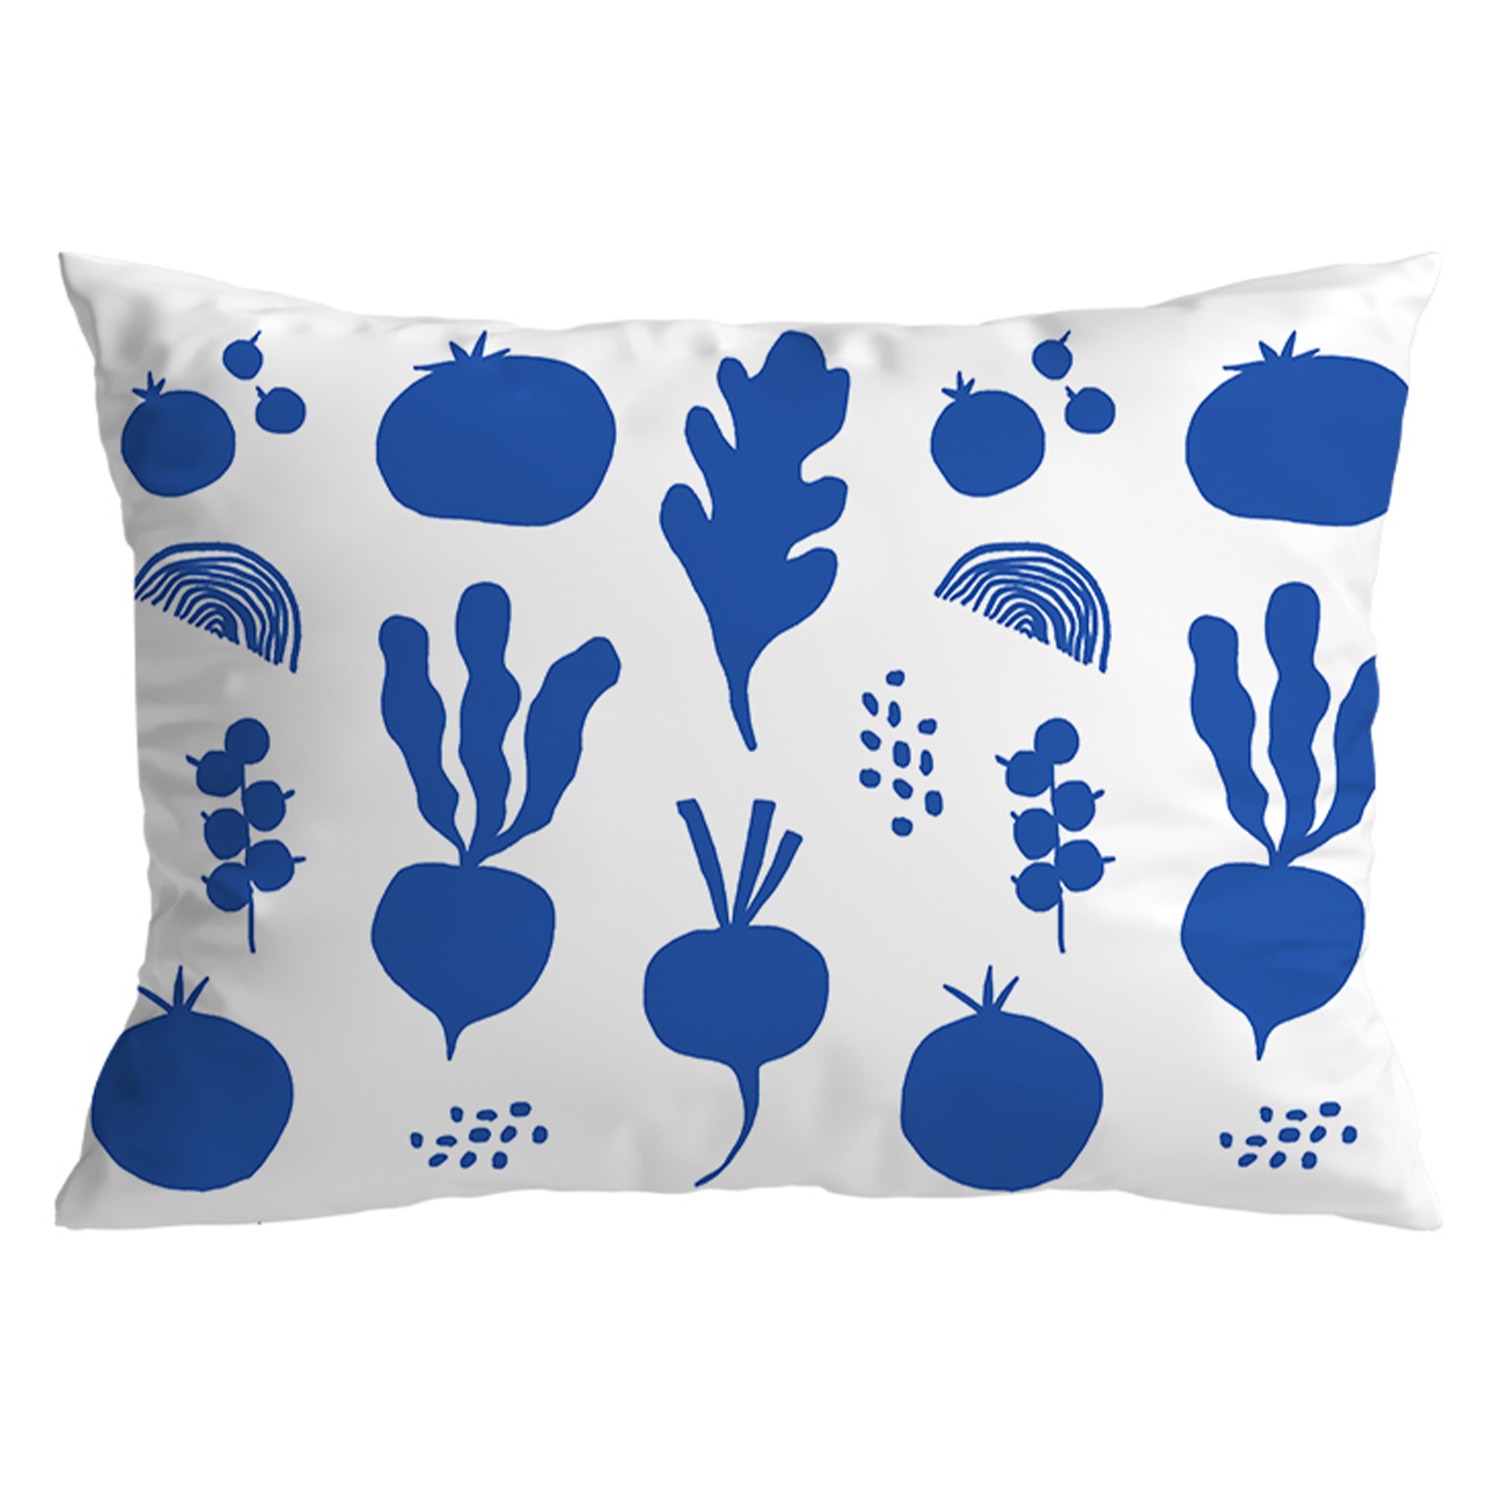 [a.o.b] Vegetable pillow cover